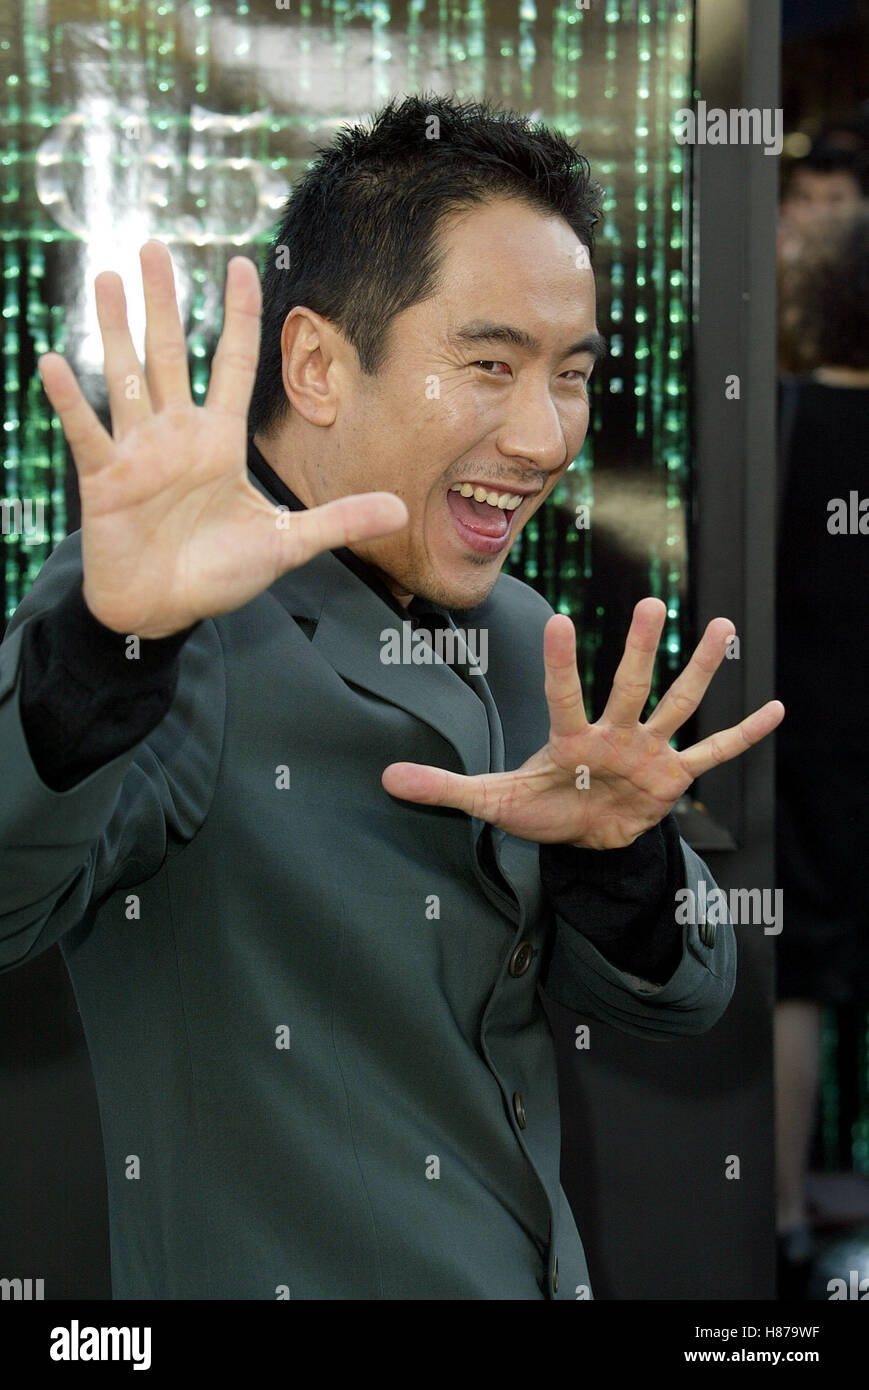 ANTHONY WONG MATRIX RELOADED FILM PREMIERE WESTWOOD LOS ANGELES USA 07 May 2003 Stock Photo